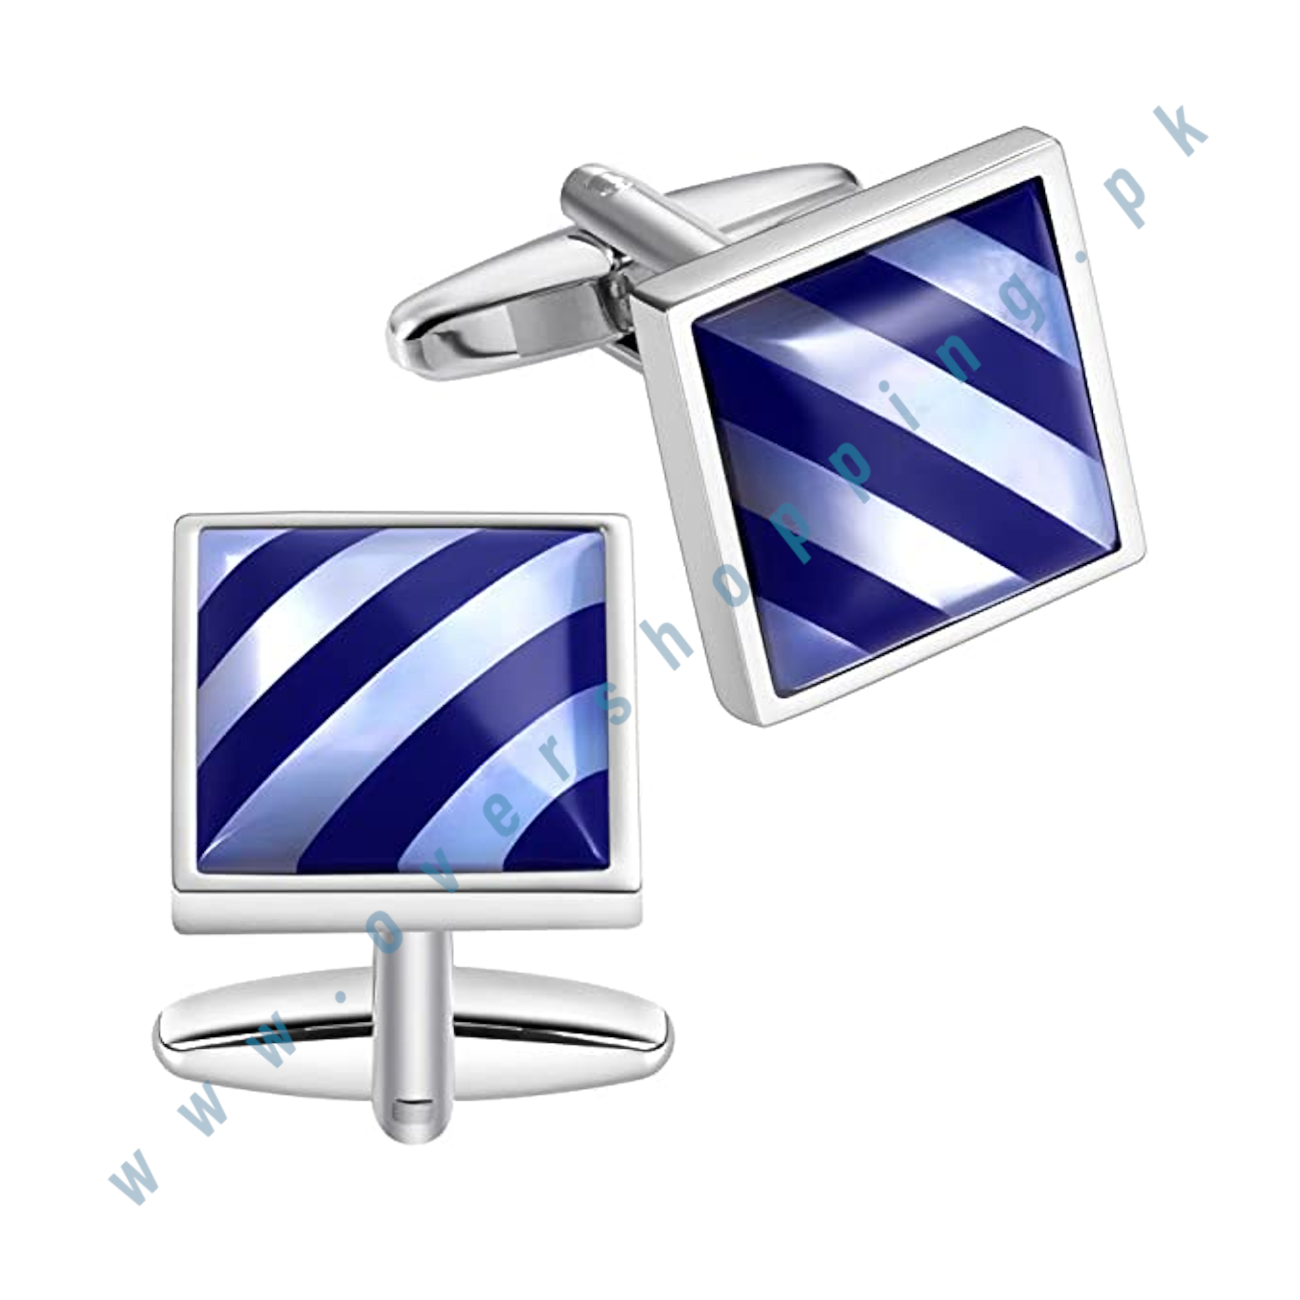 HAWSON Cufflinks for Men Gift Box Packing - Handmade Classic Mother of Pearl Silver - White Seashell & Blue Stripes